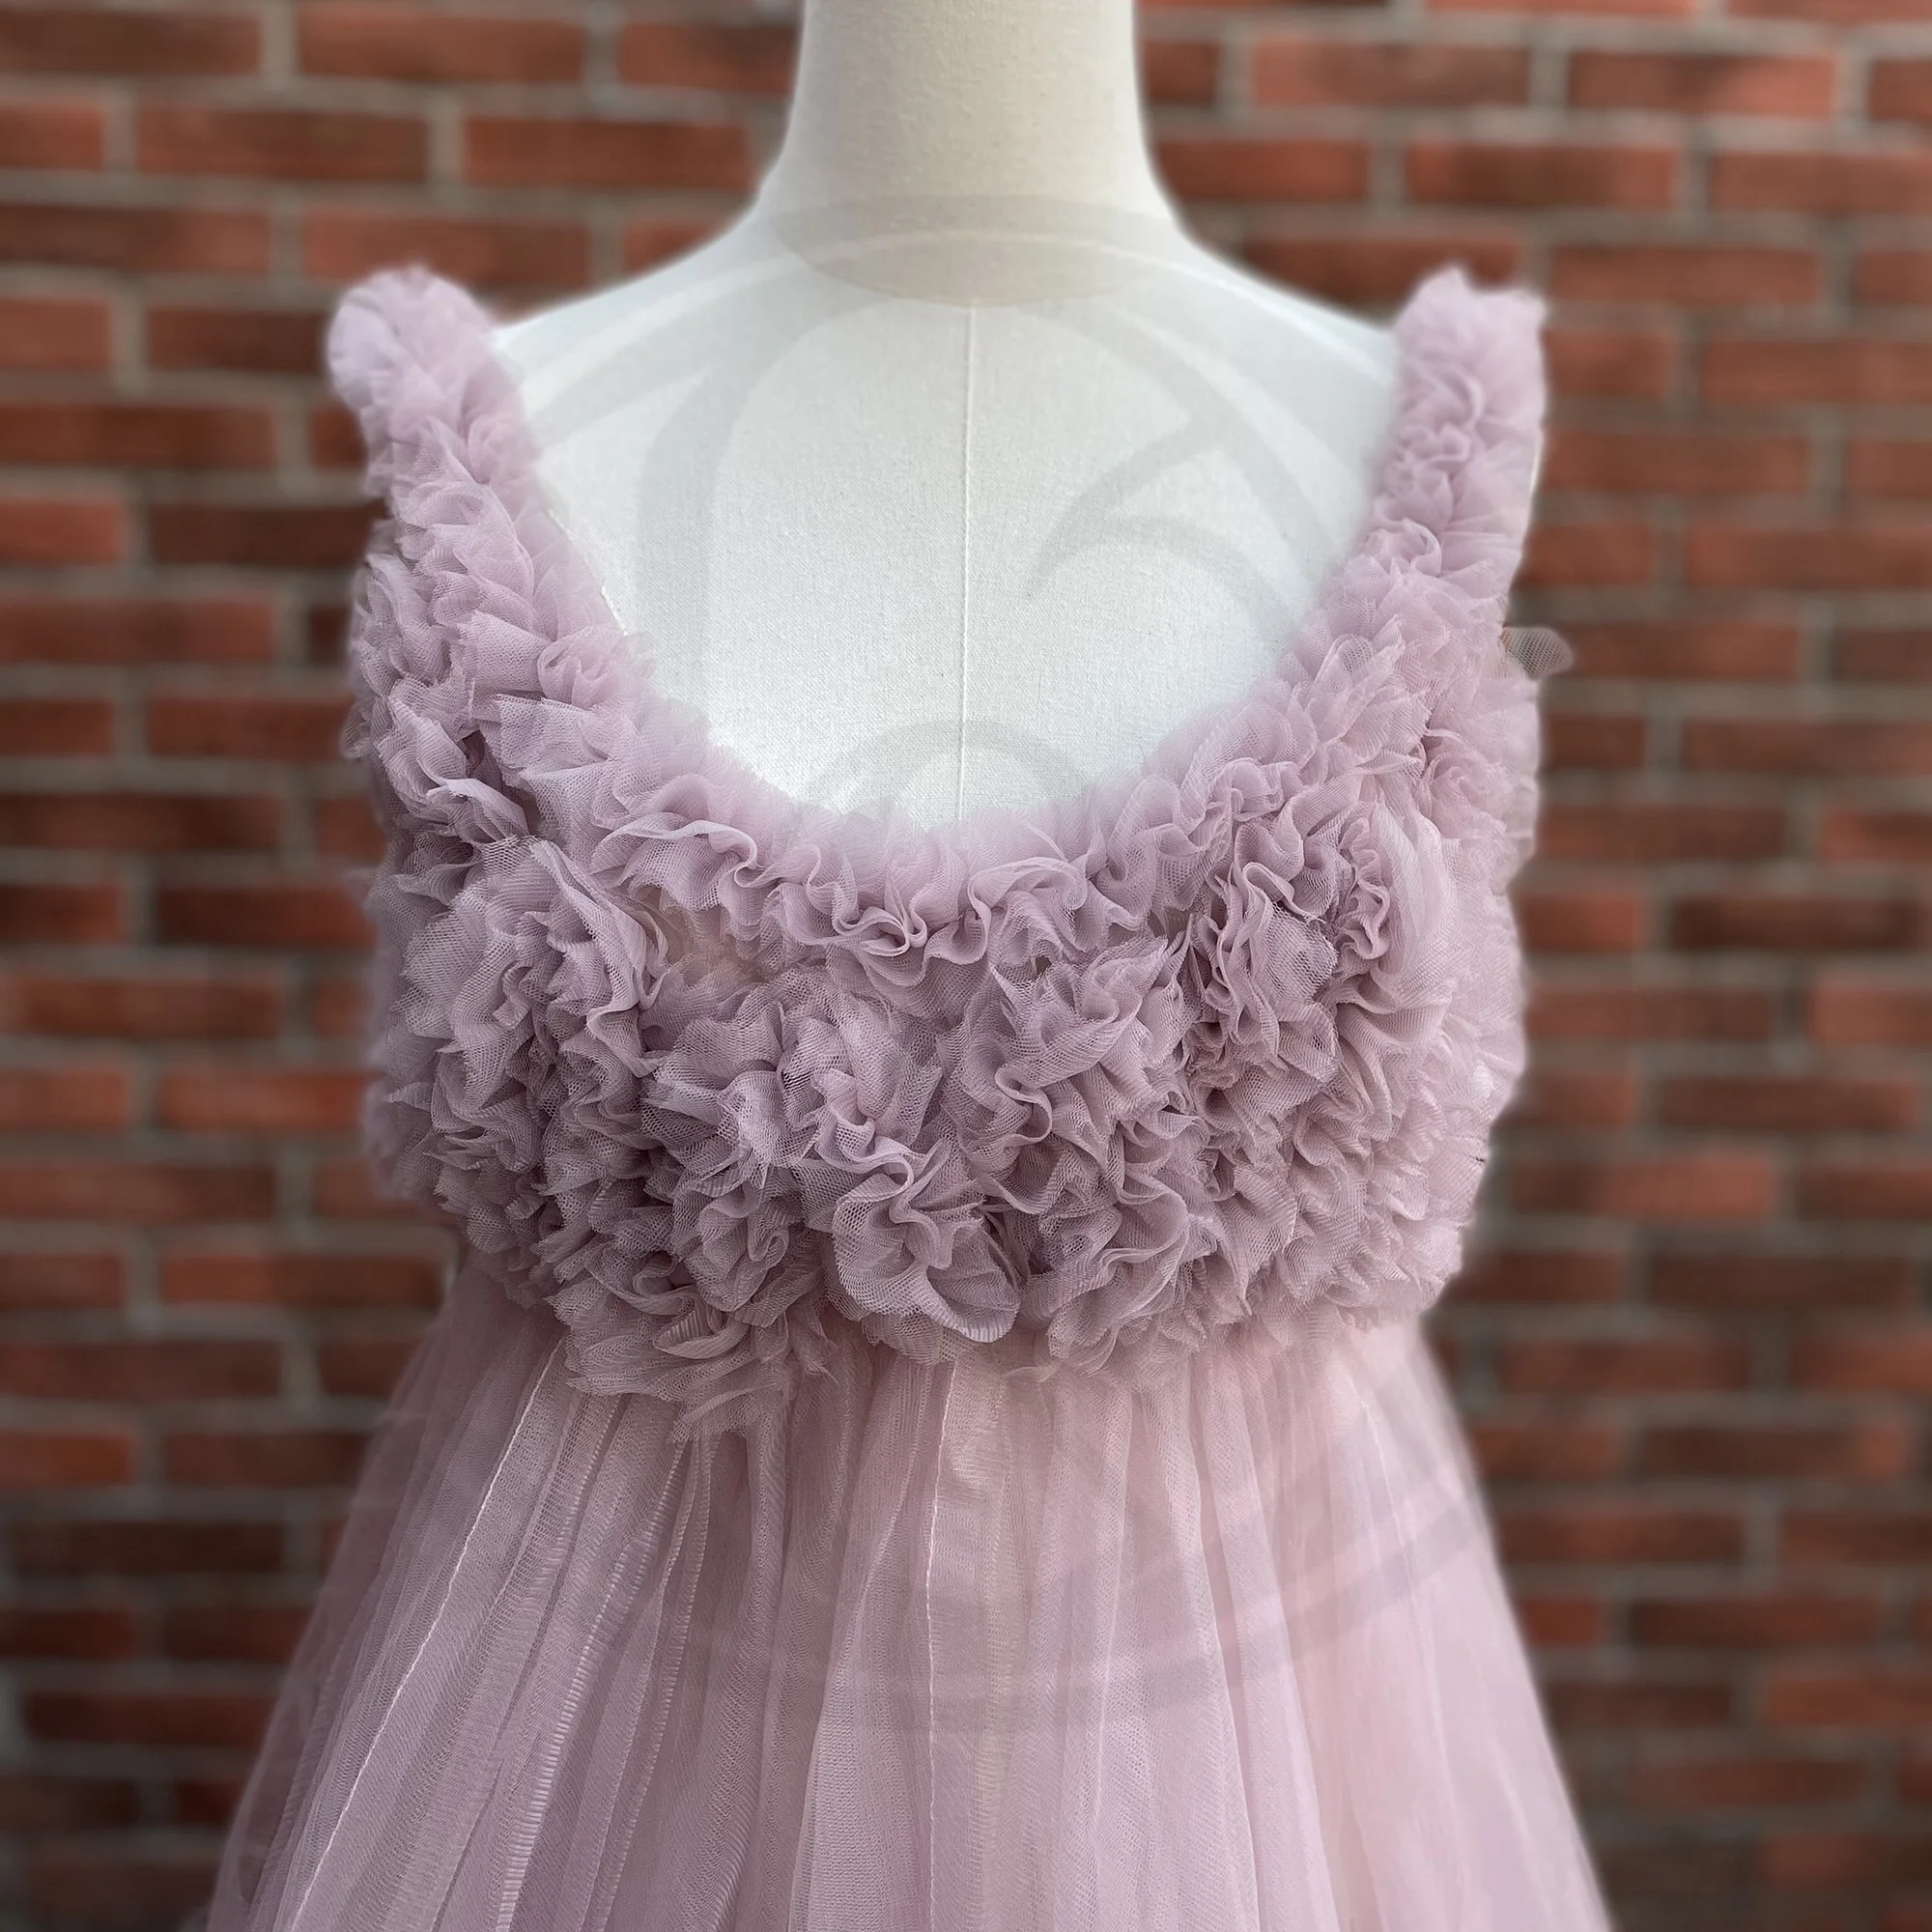 Beautiful Photo Light Purple Tulle Maternity Clothing Pregnant Gown Couture Robe Woman Photography Costume Baby Shower Dress enlarge